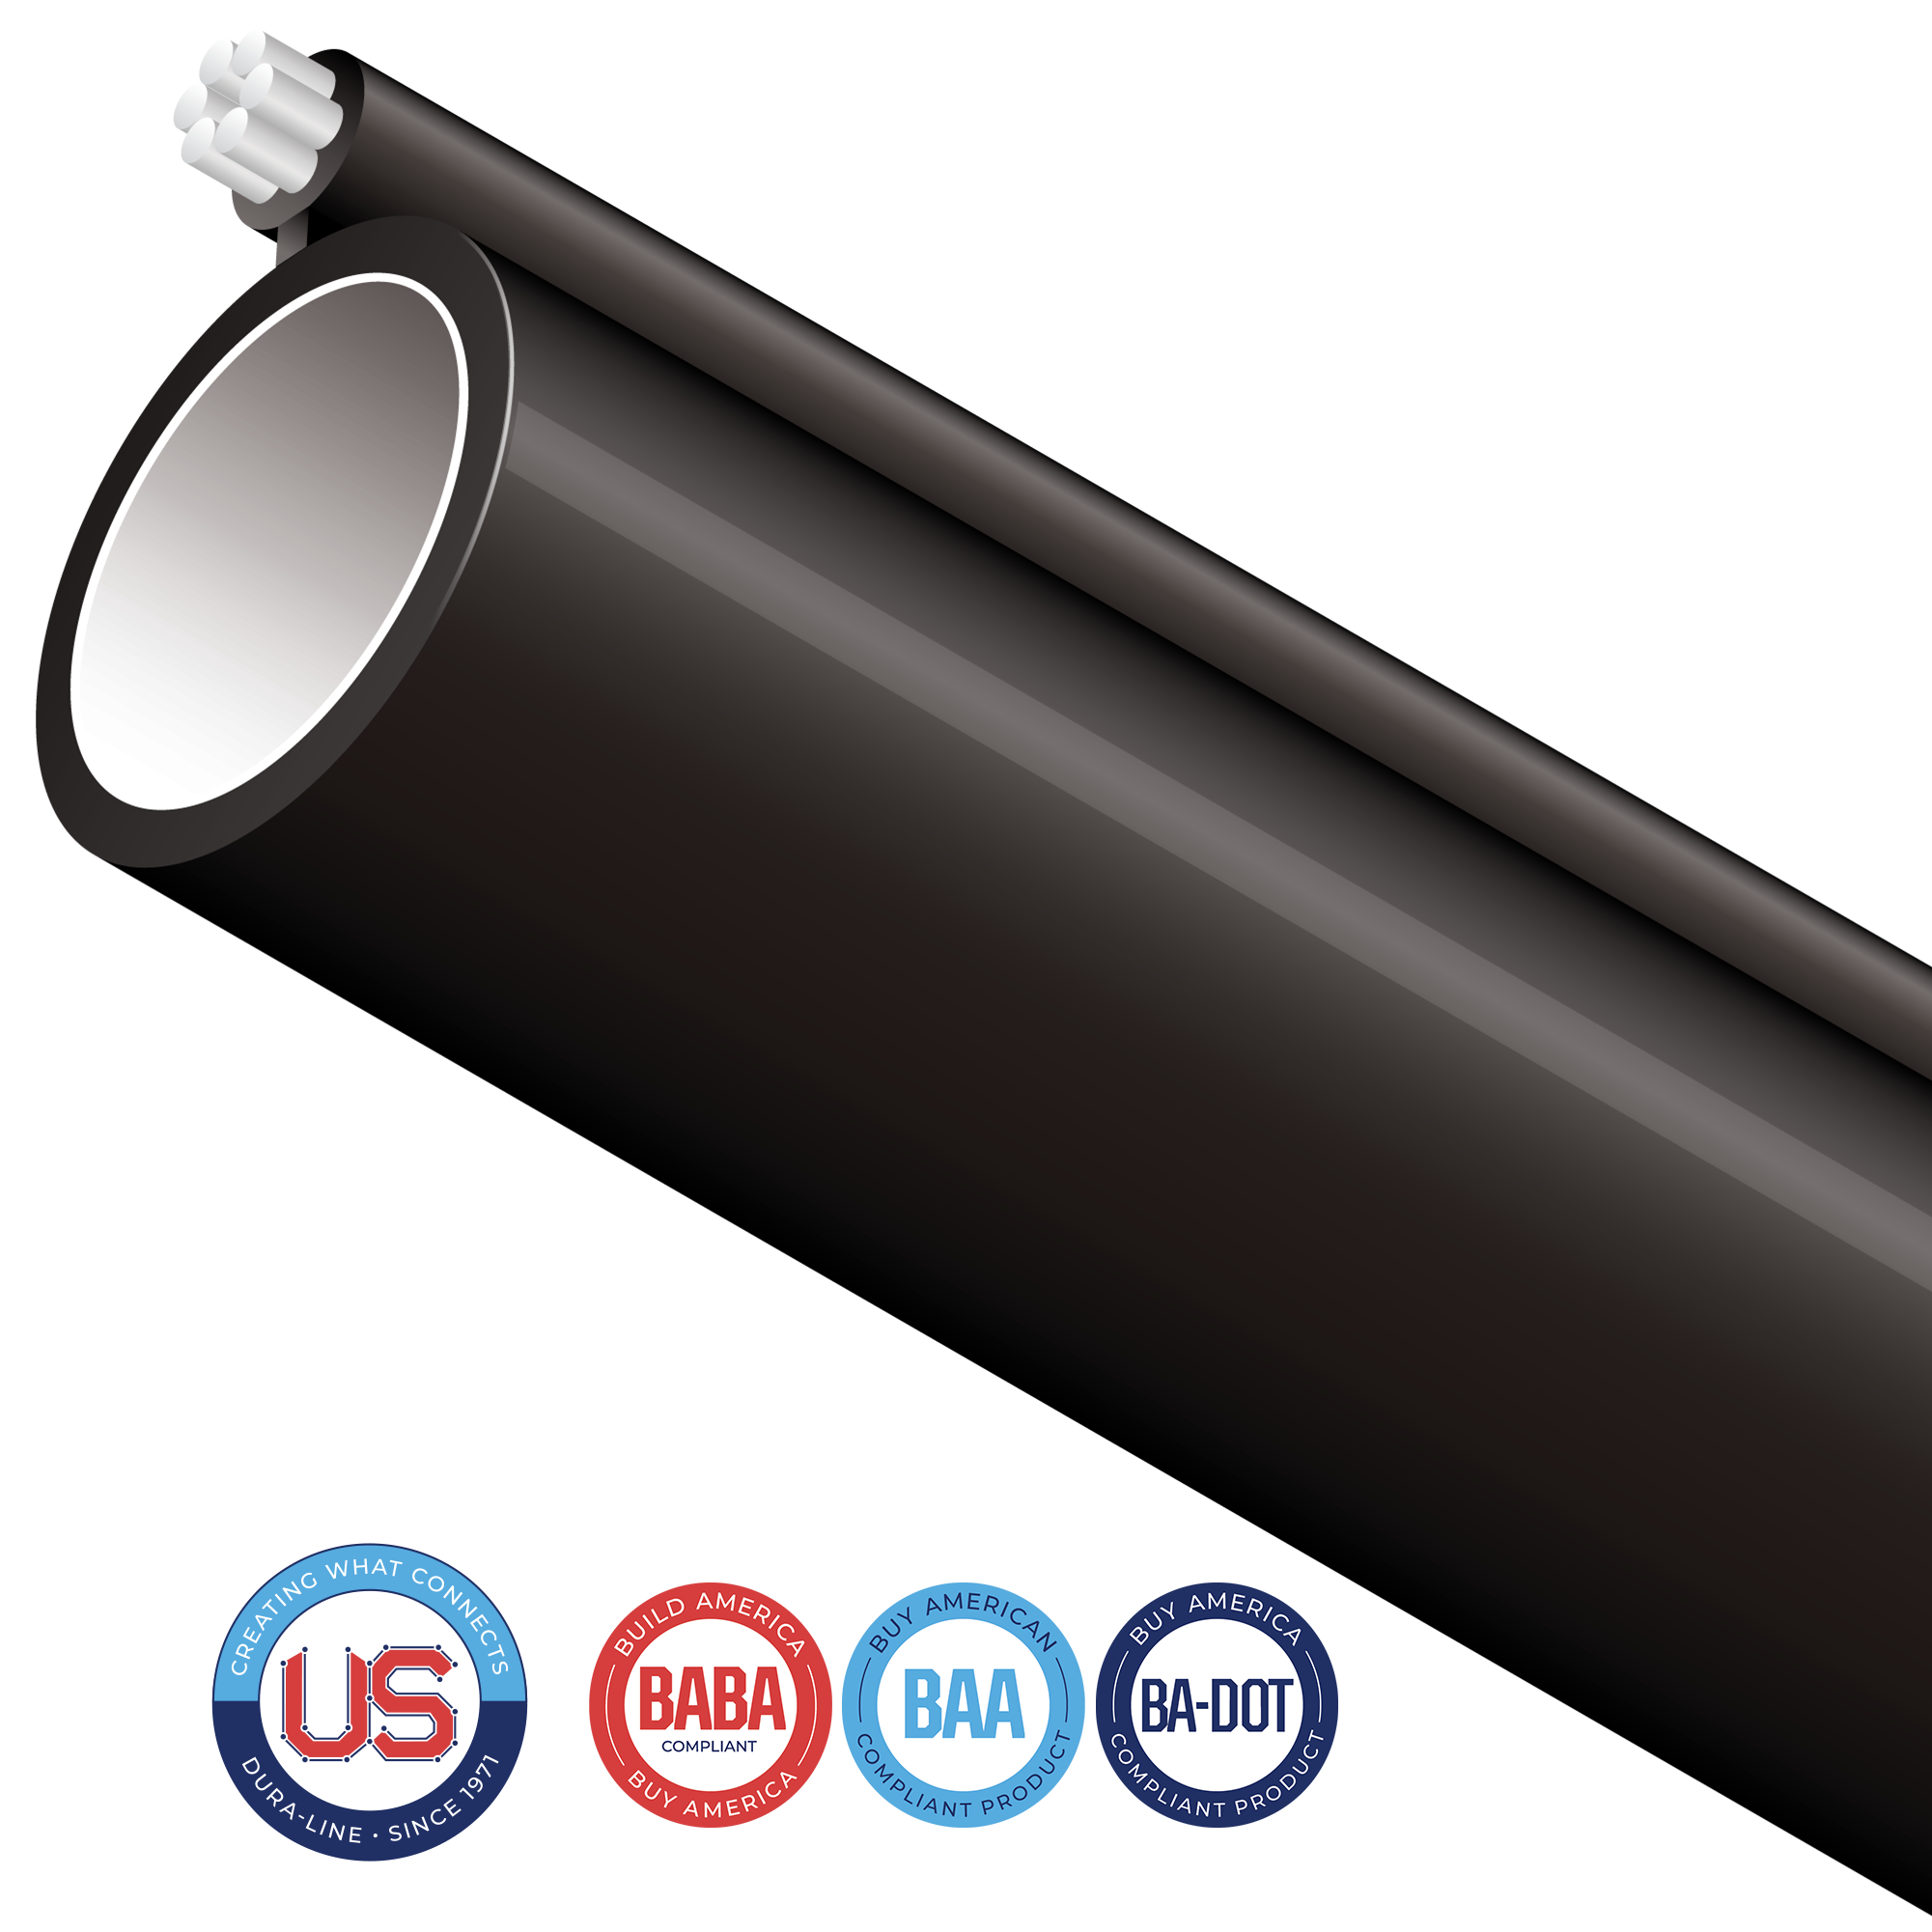 Standard Figure-8 aerial conduit is designed with an Extra High Strength (EHS) flooded galvanized support strand for one-step aerial placement. The conduit is manufactured with carbon black and antioxidants for maximum UV protection. Figure-8 can be installed with standard aerial installation practices. We offer an extensive portfolio of US-made conduit products and accessories that conform with several domestic preference standards, including Buy America (BAA), Build America, Buy America (BABA), and DOT Buy American requirements. Any products including a locate wire or preinstalled cables, will need to be specifically evaluated. FIre Retardant Resins may also require additional evaluation to meet program guidelines. Please contact your Dura-Line representative for more information.